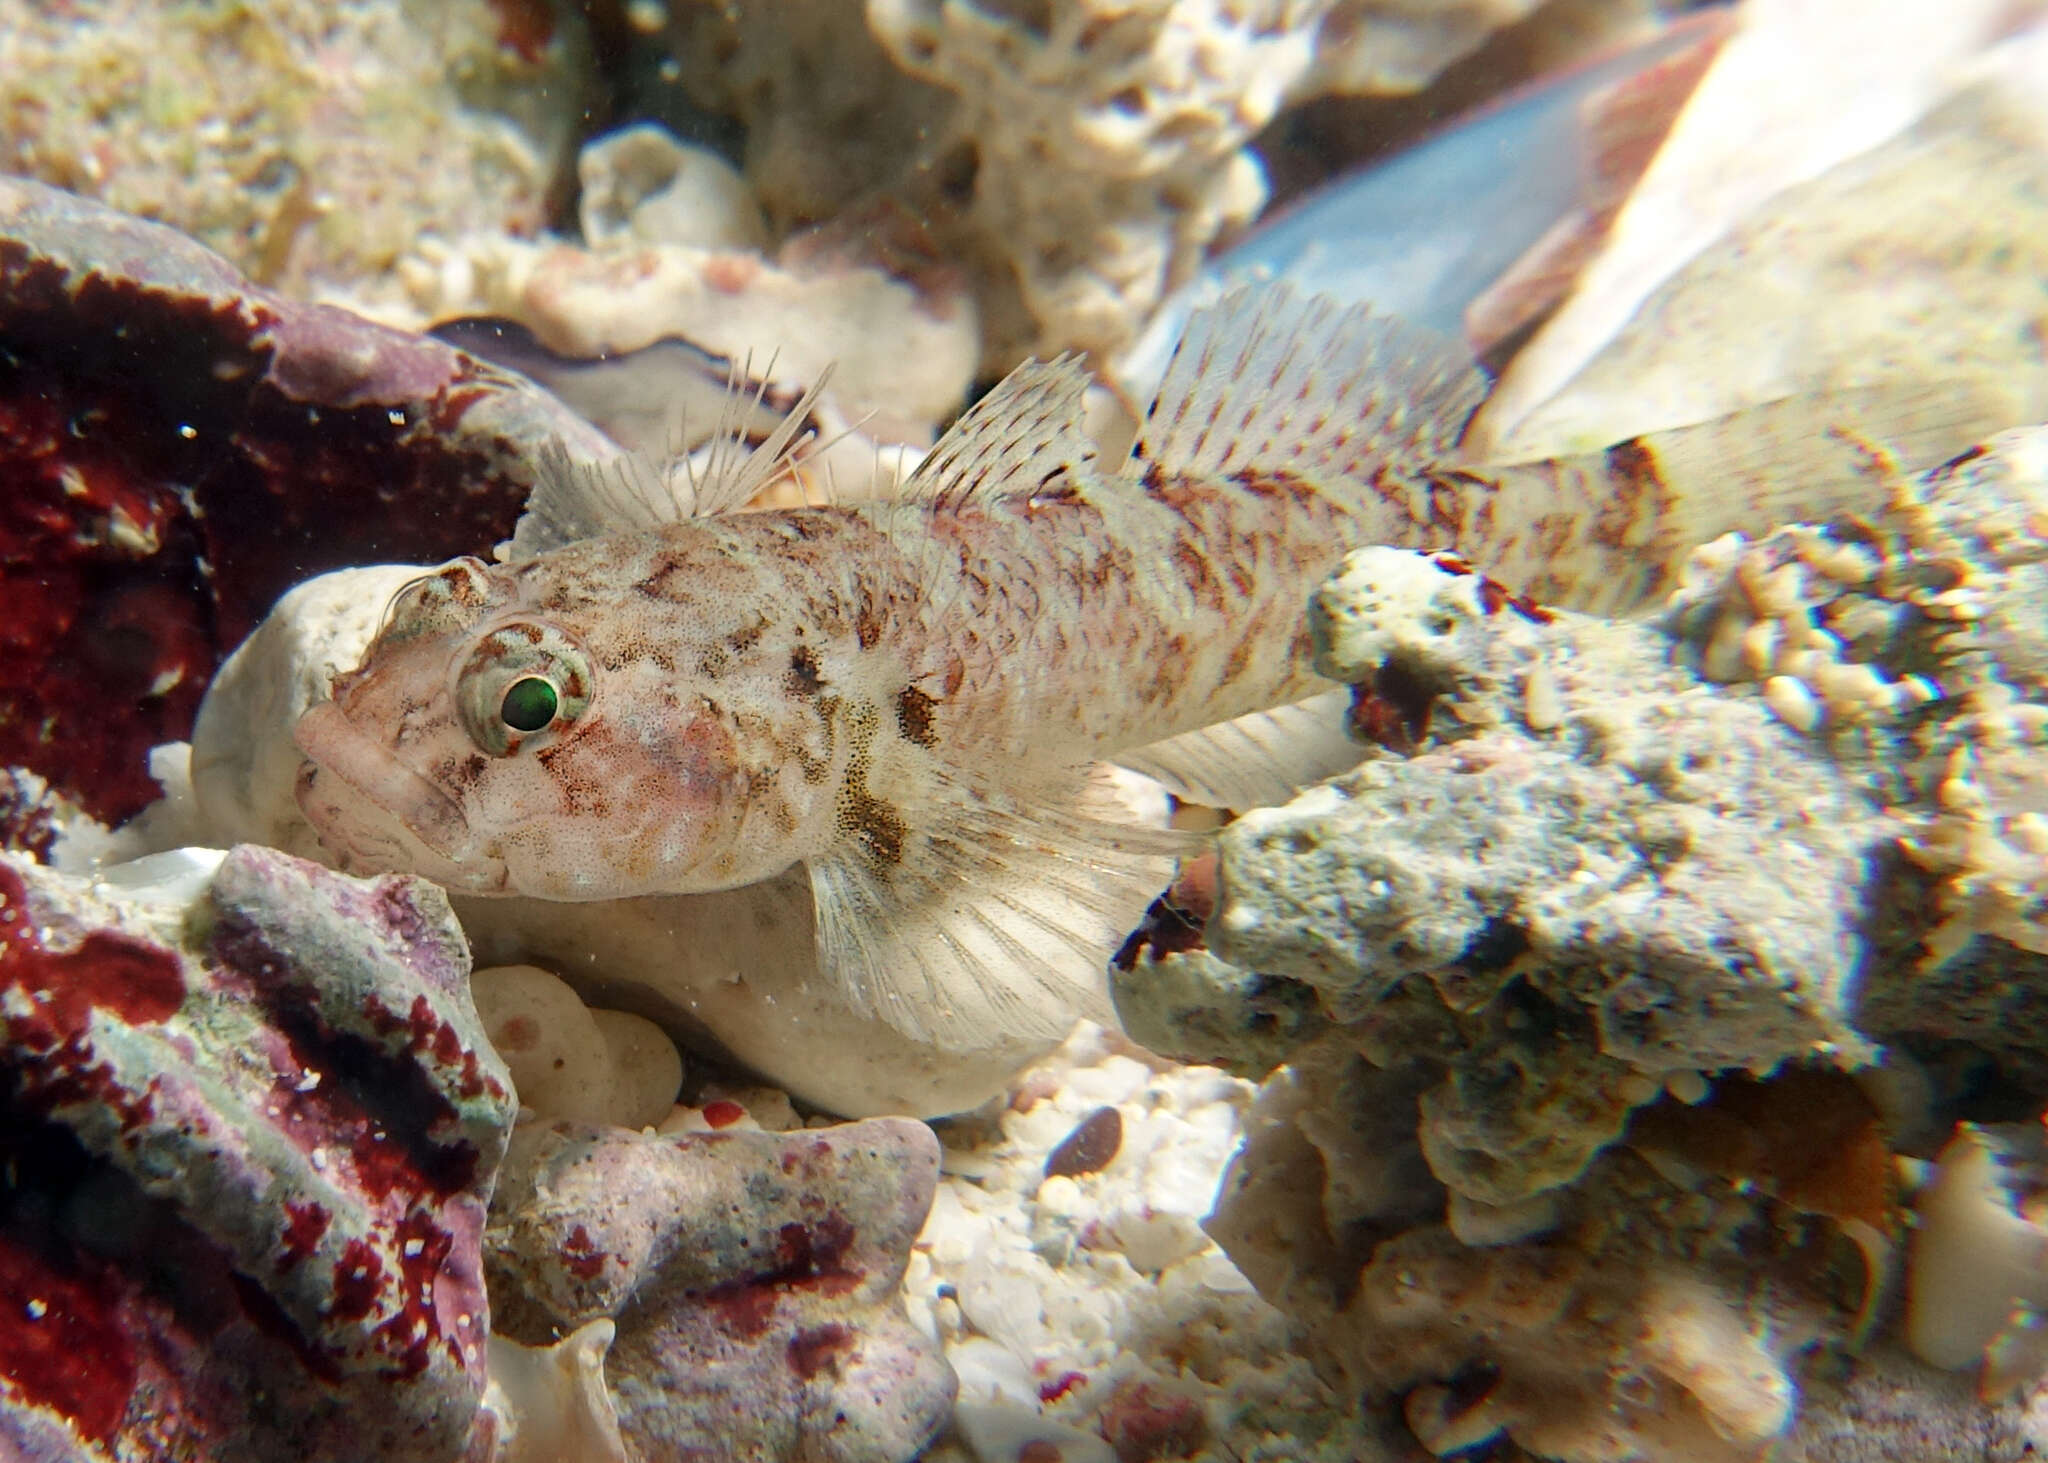 Image of Brownboy goby